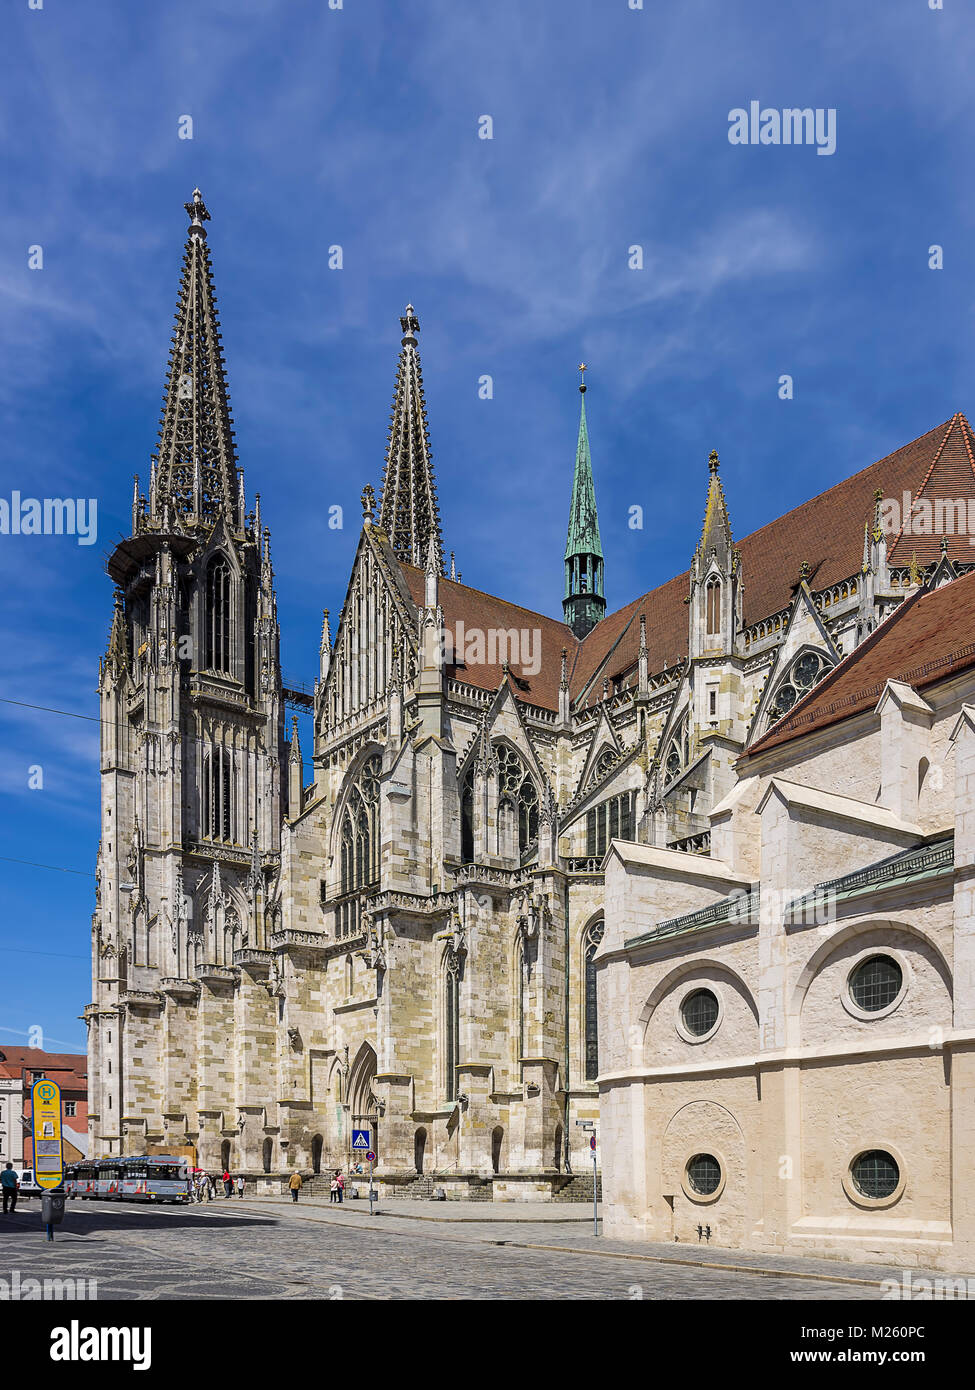 Cathedral St. Peter in Regensburg, Bavaria, Germany. Stock Photo